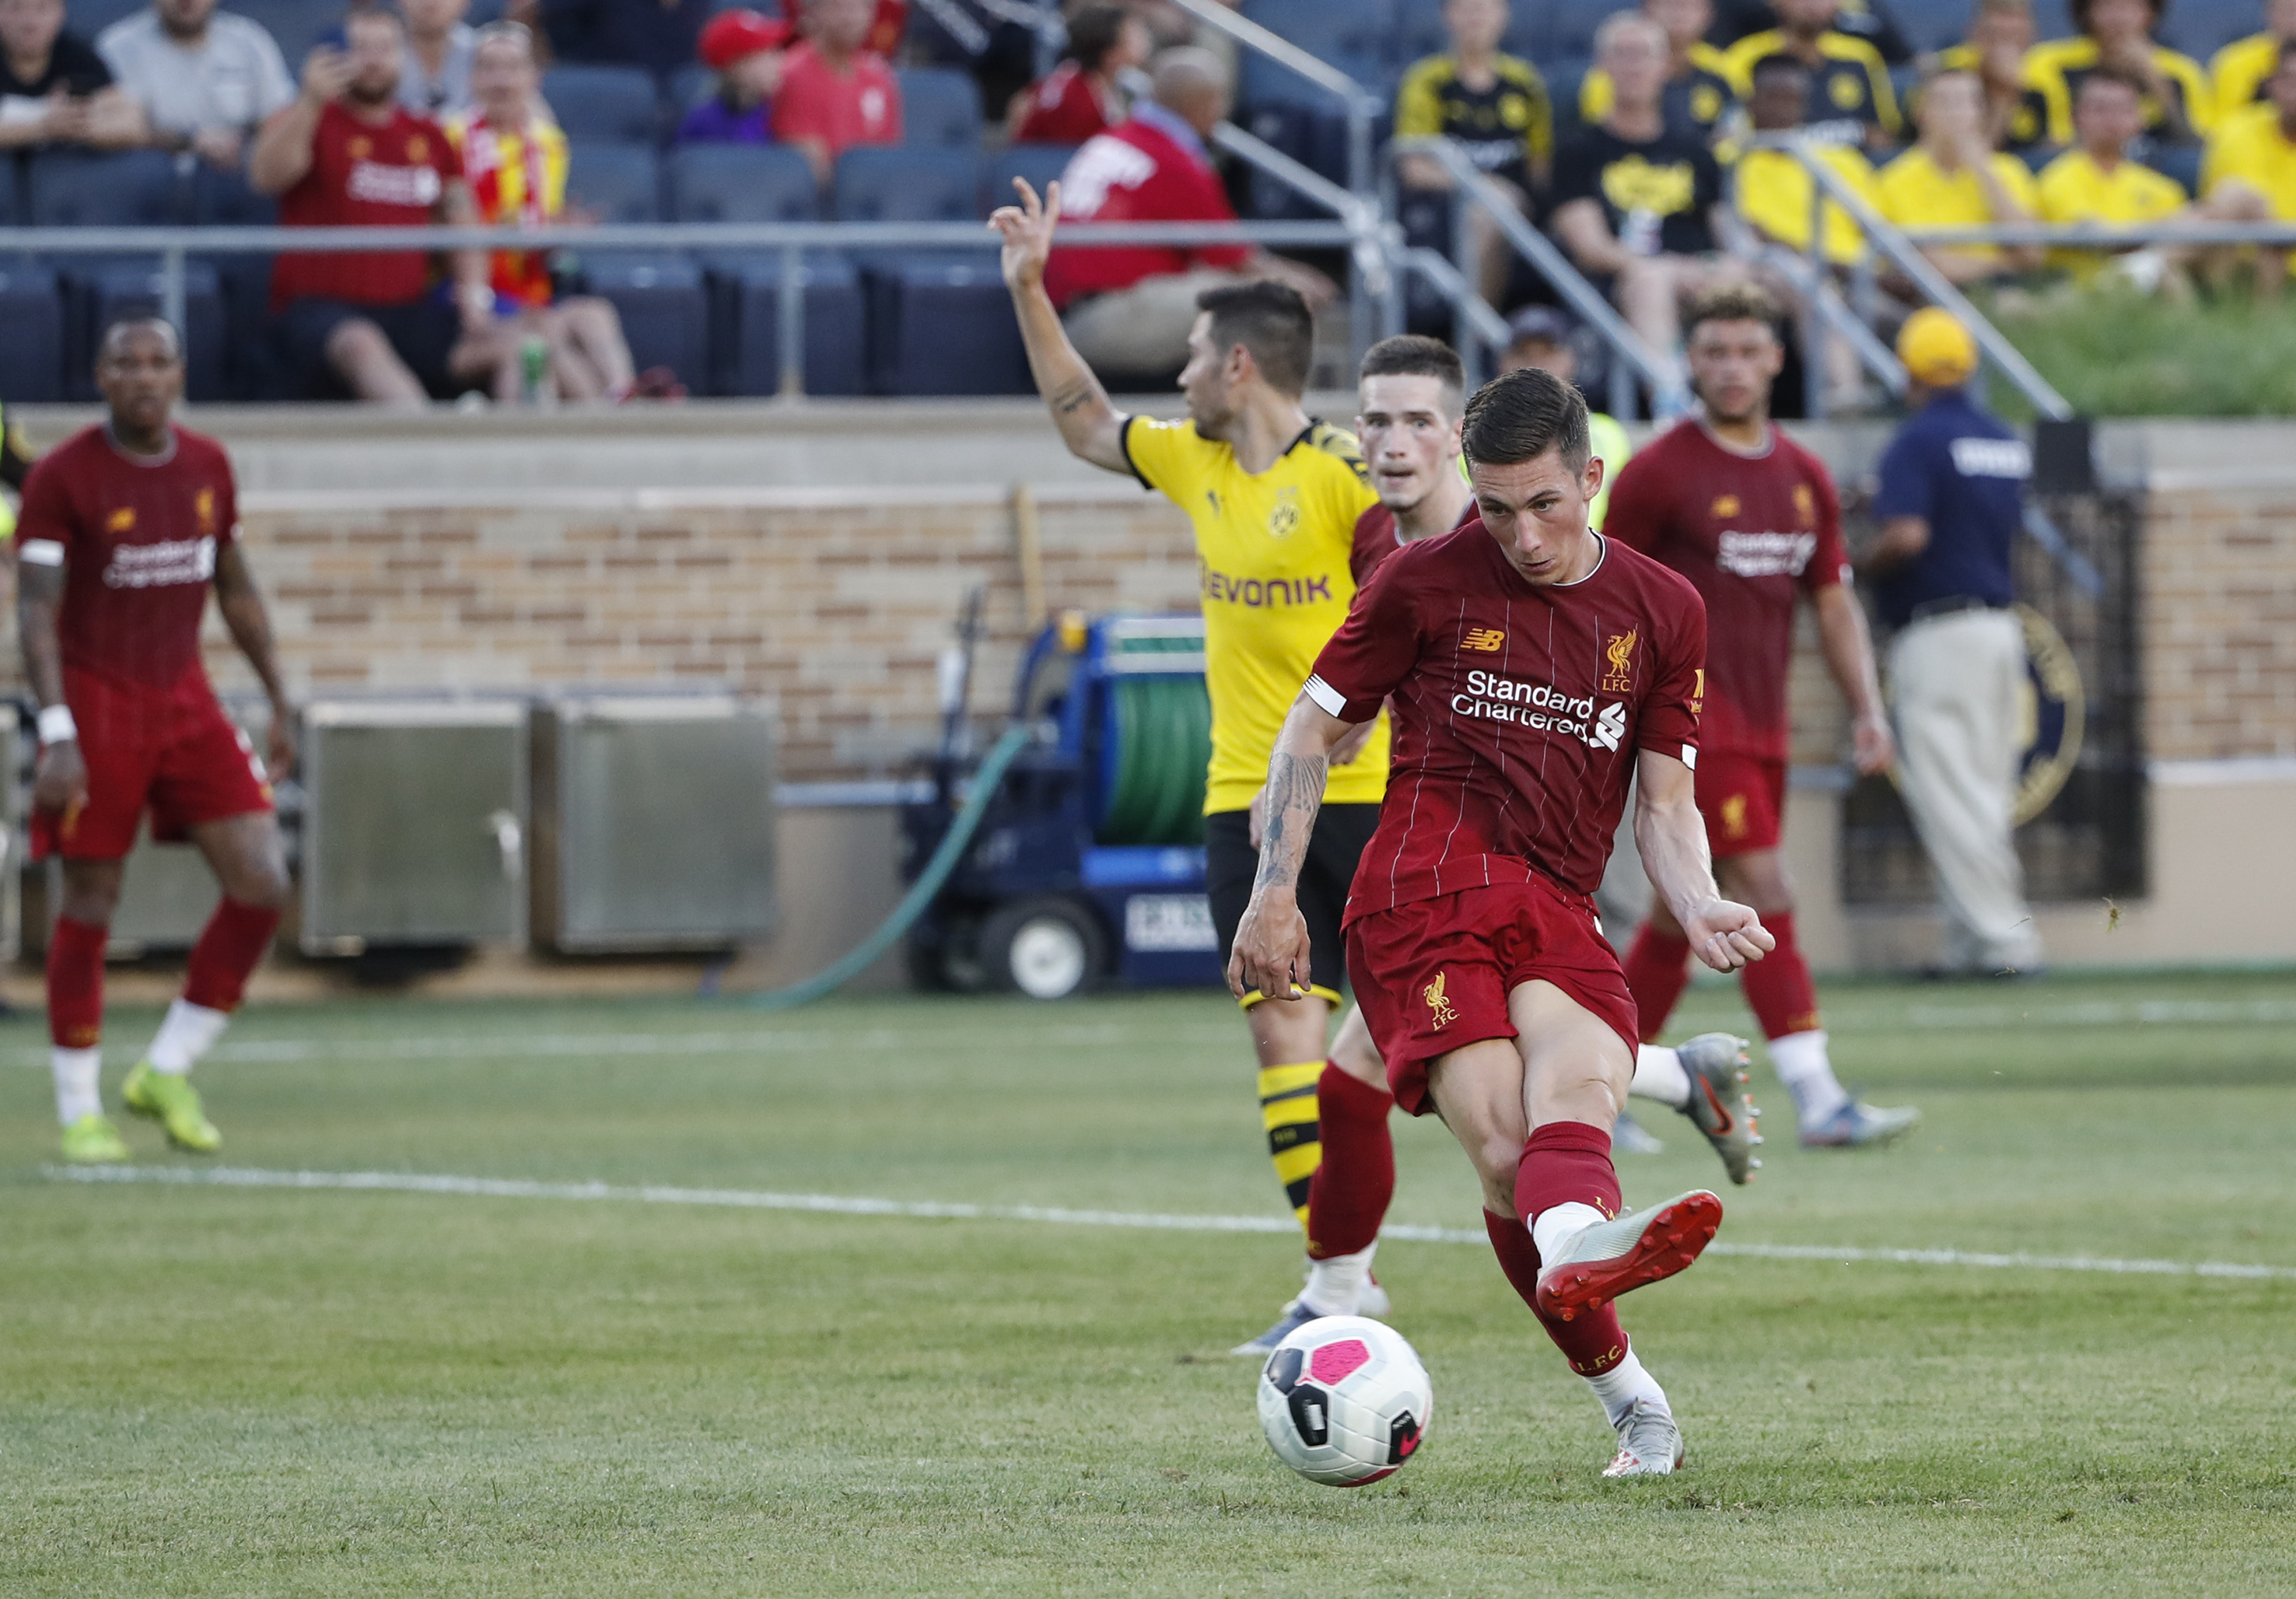 Liverpool midfielder Harry Wilson kicks to score against Borussia Dortmund during the first half of the international friendly match at Notre Dame Stadium in South Bend, Indiana, July 19, 2019. (Photo by KAMIL KRZACZYNSKI / AFP)        (Photo credit should read KAMIL KRZACZYNSKI/AFP/Getty Images)